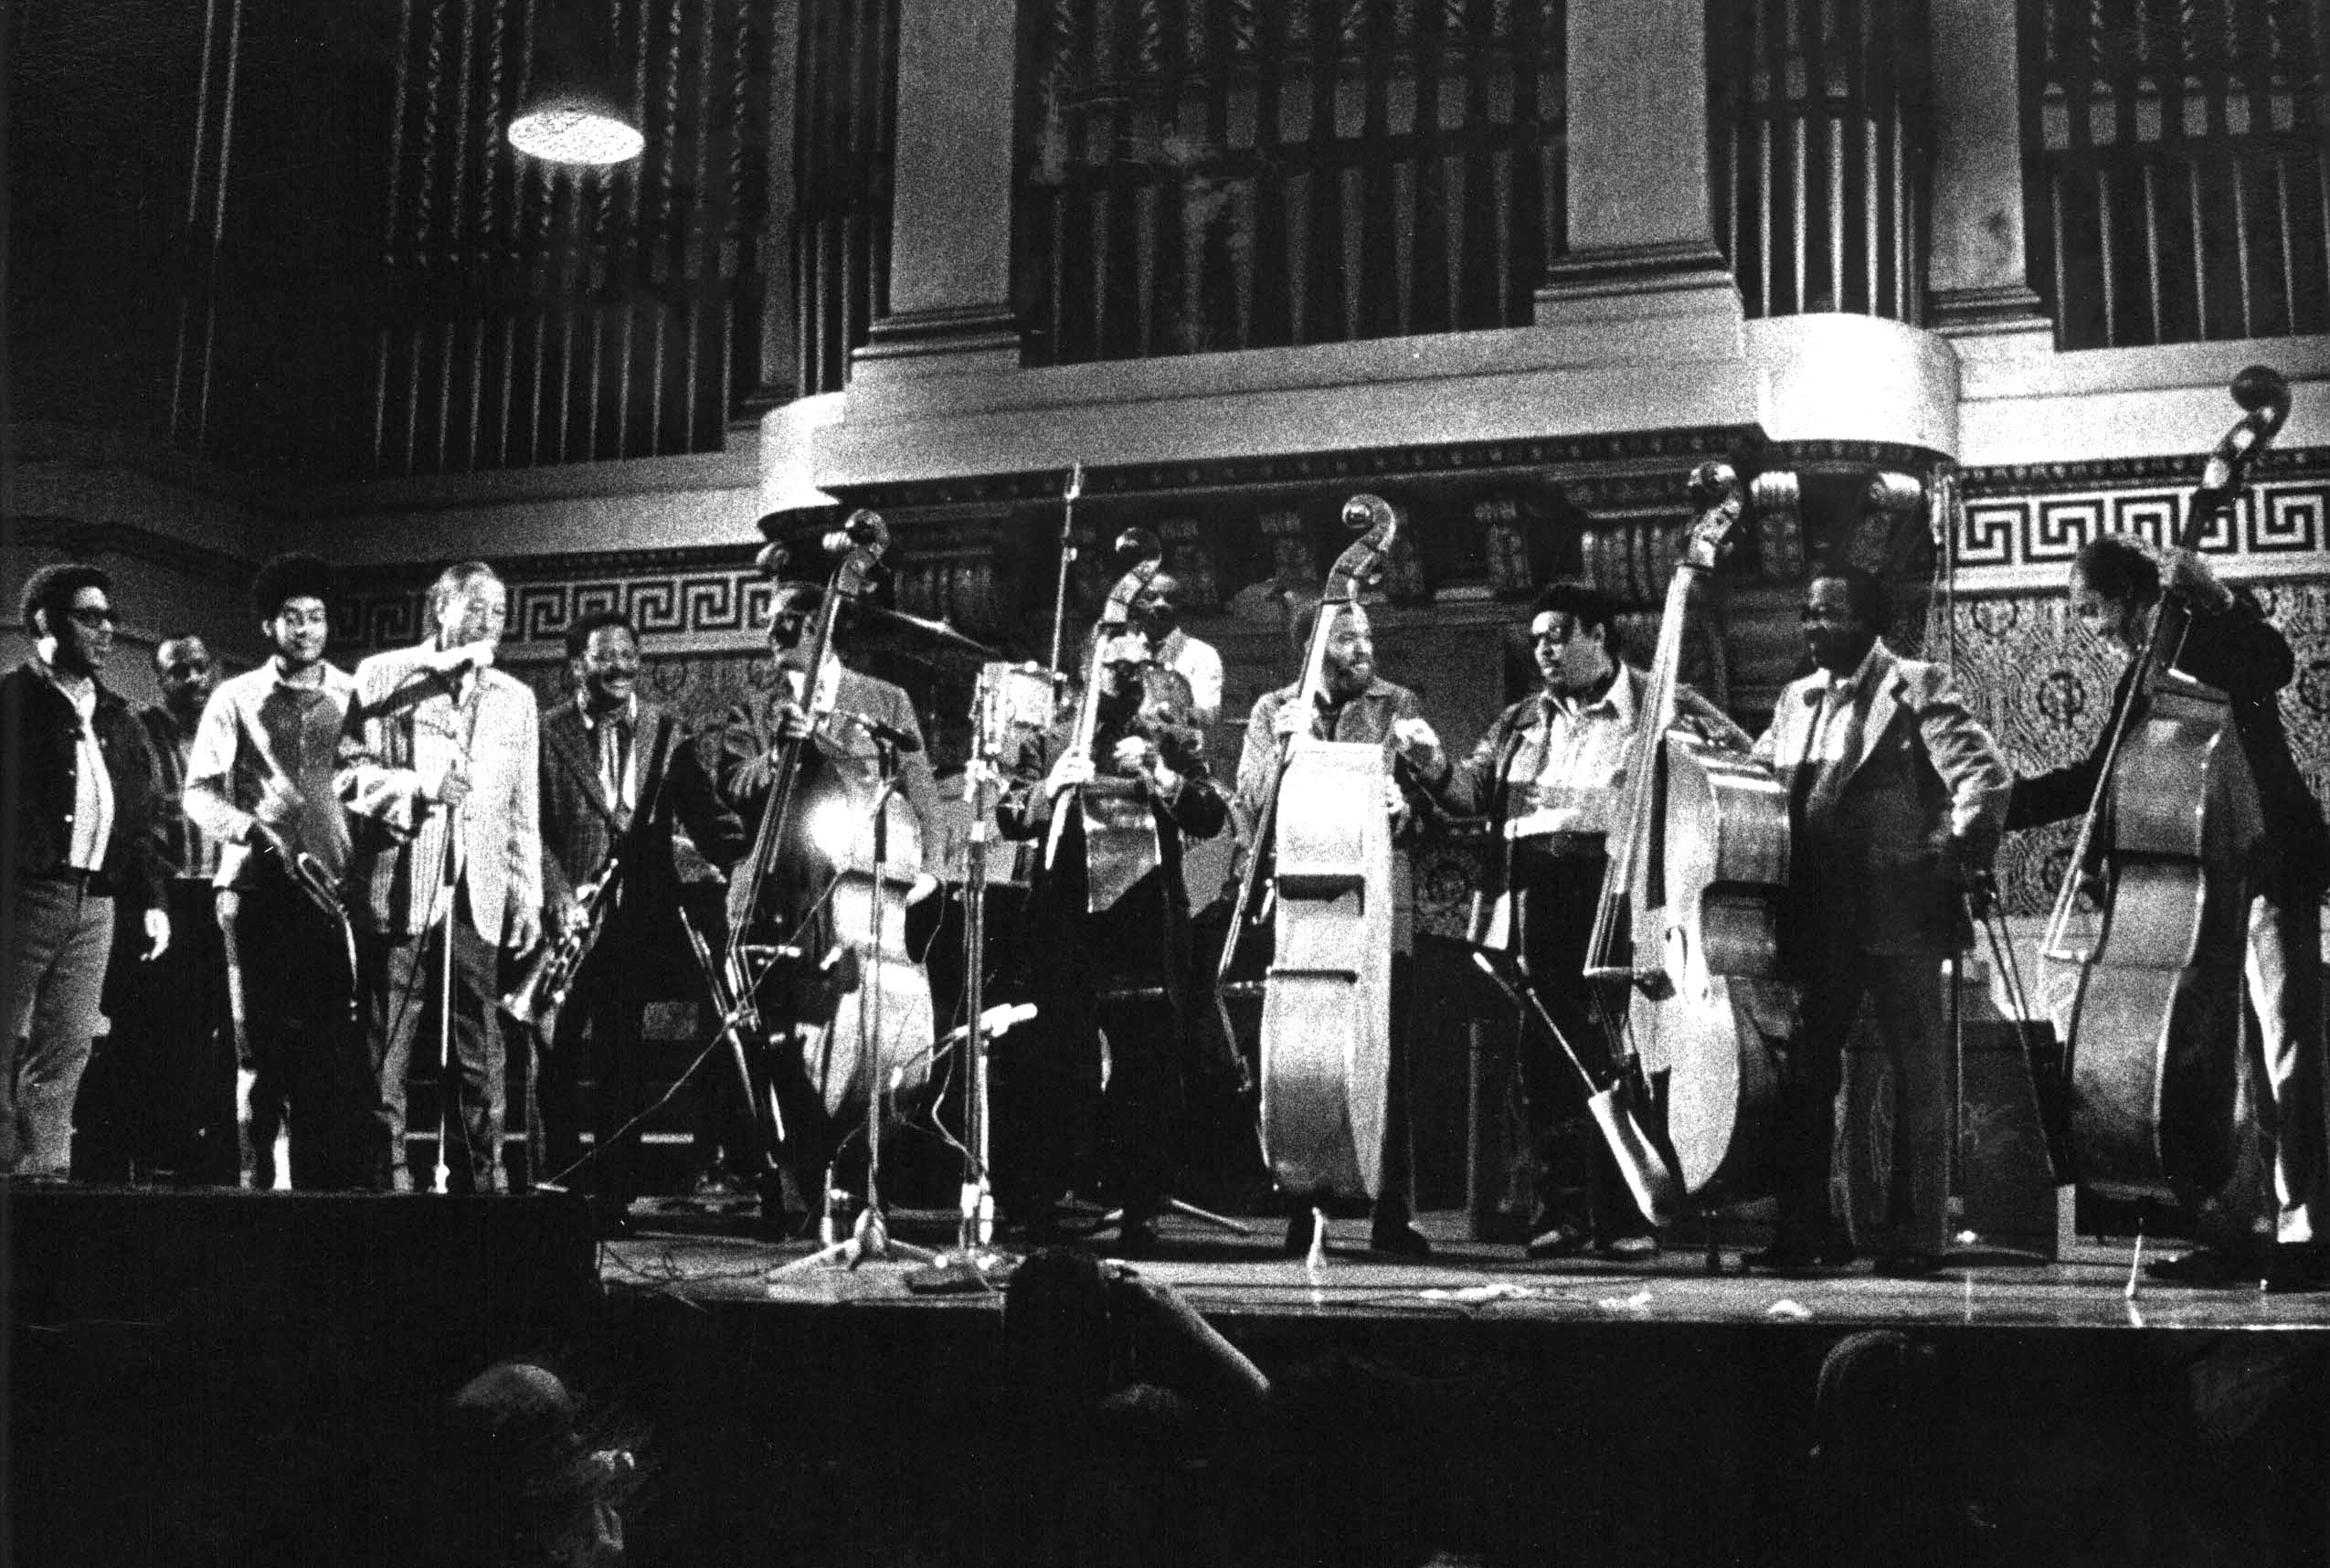 Dizzy, Duke, Mingus, and others at the 1972 convocation in Woolsey Hall